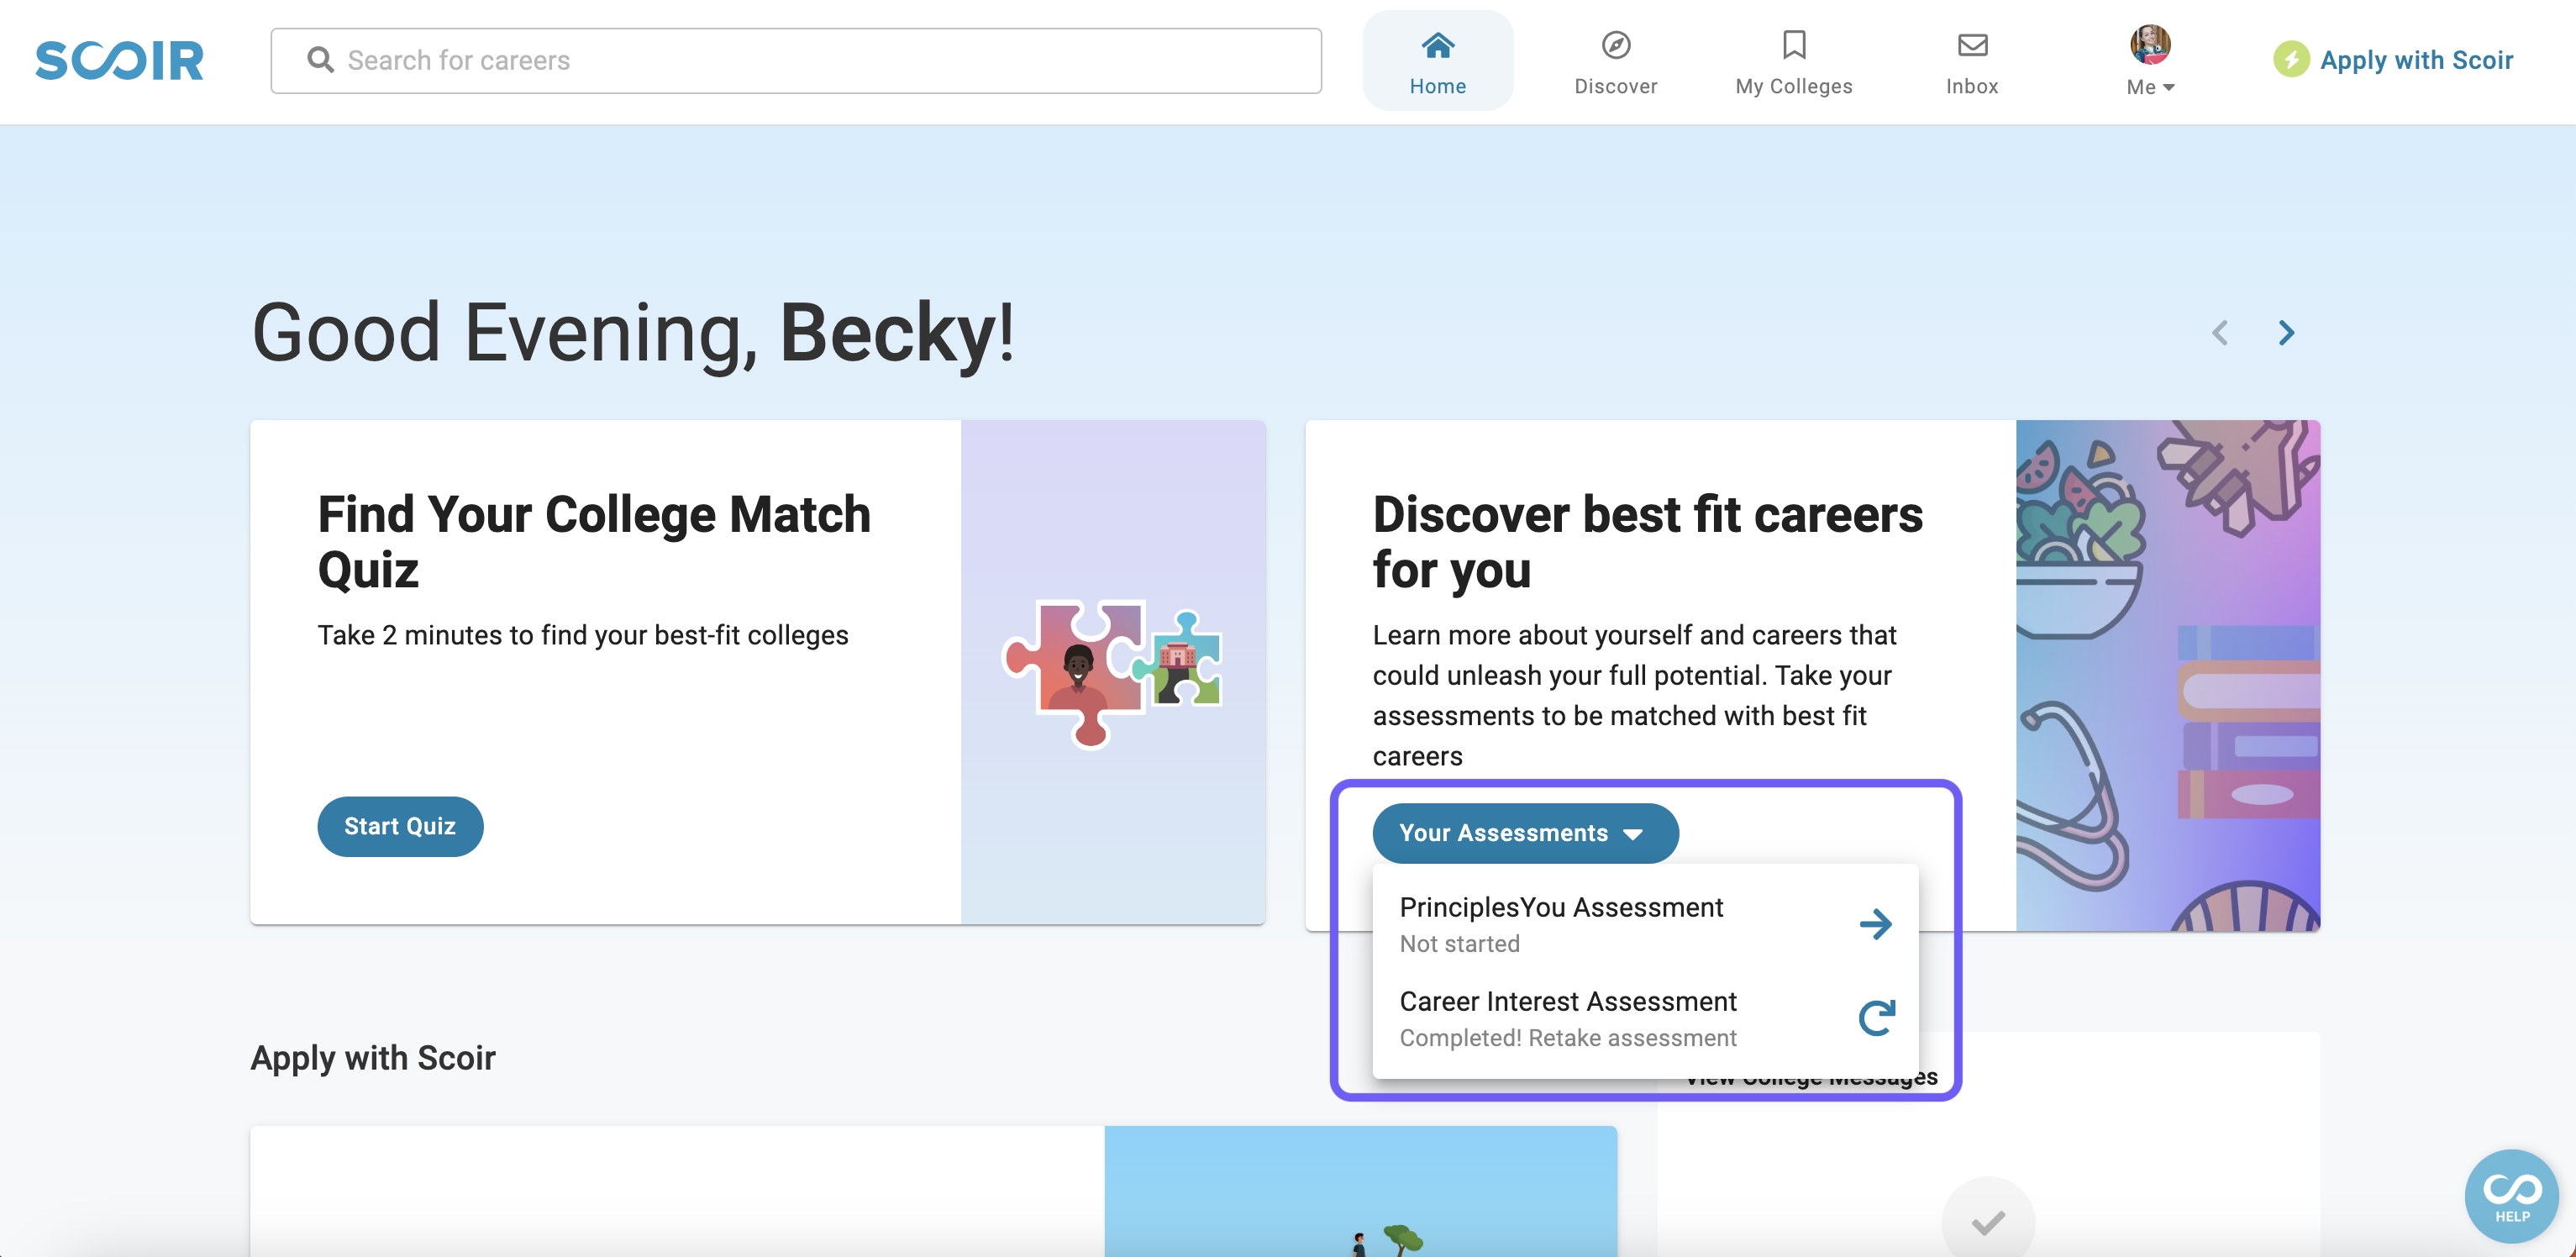 For Students: Discover Careers (and Yourself!) with PrinciplesYou - how to access PrinciplesYou Assessment